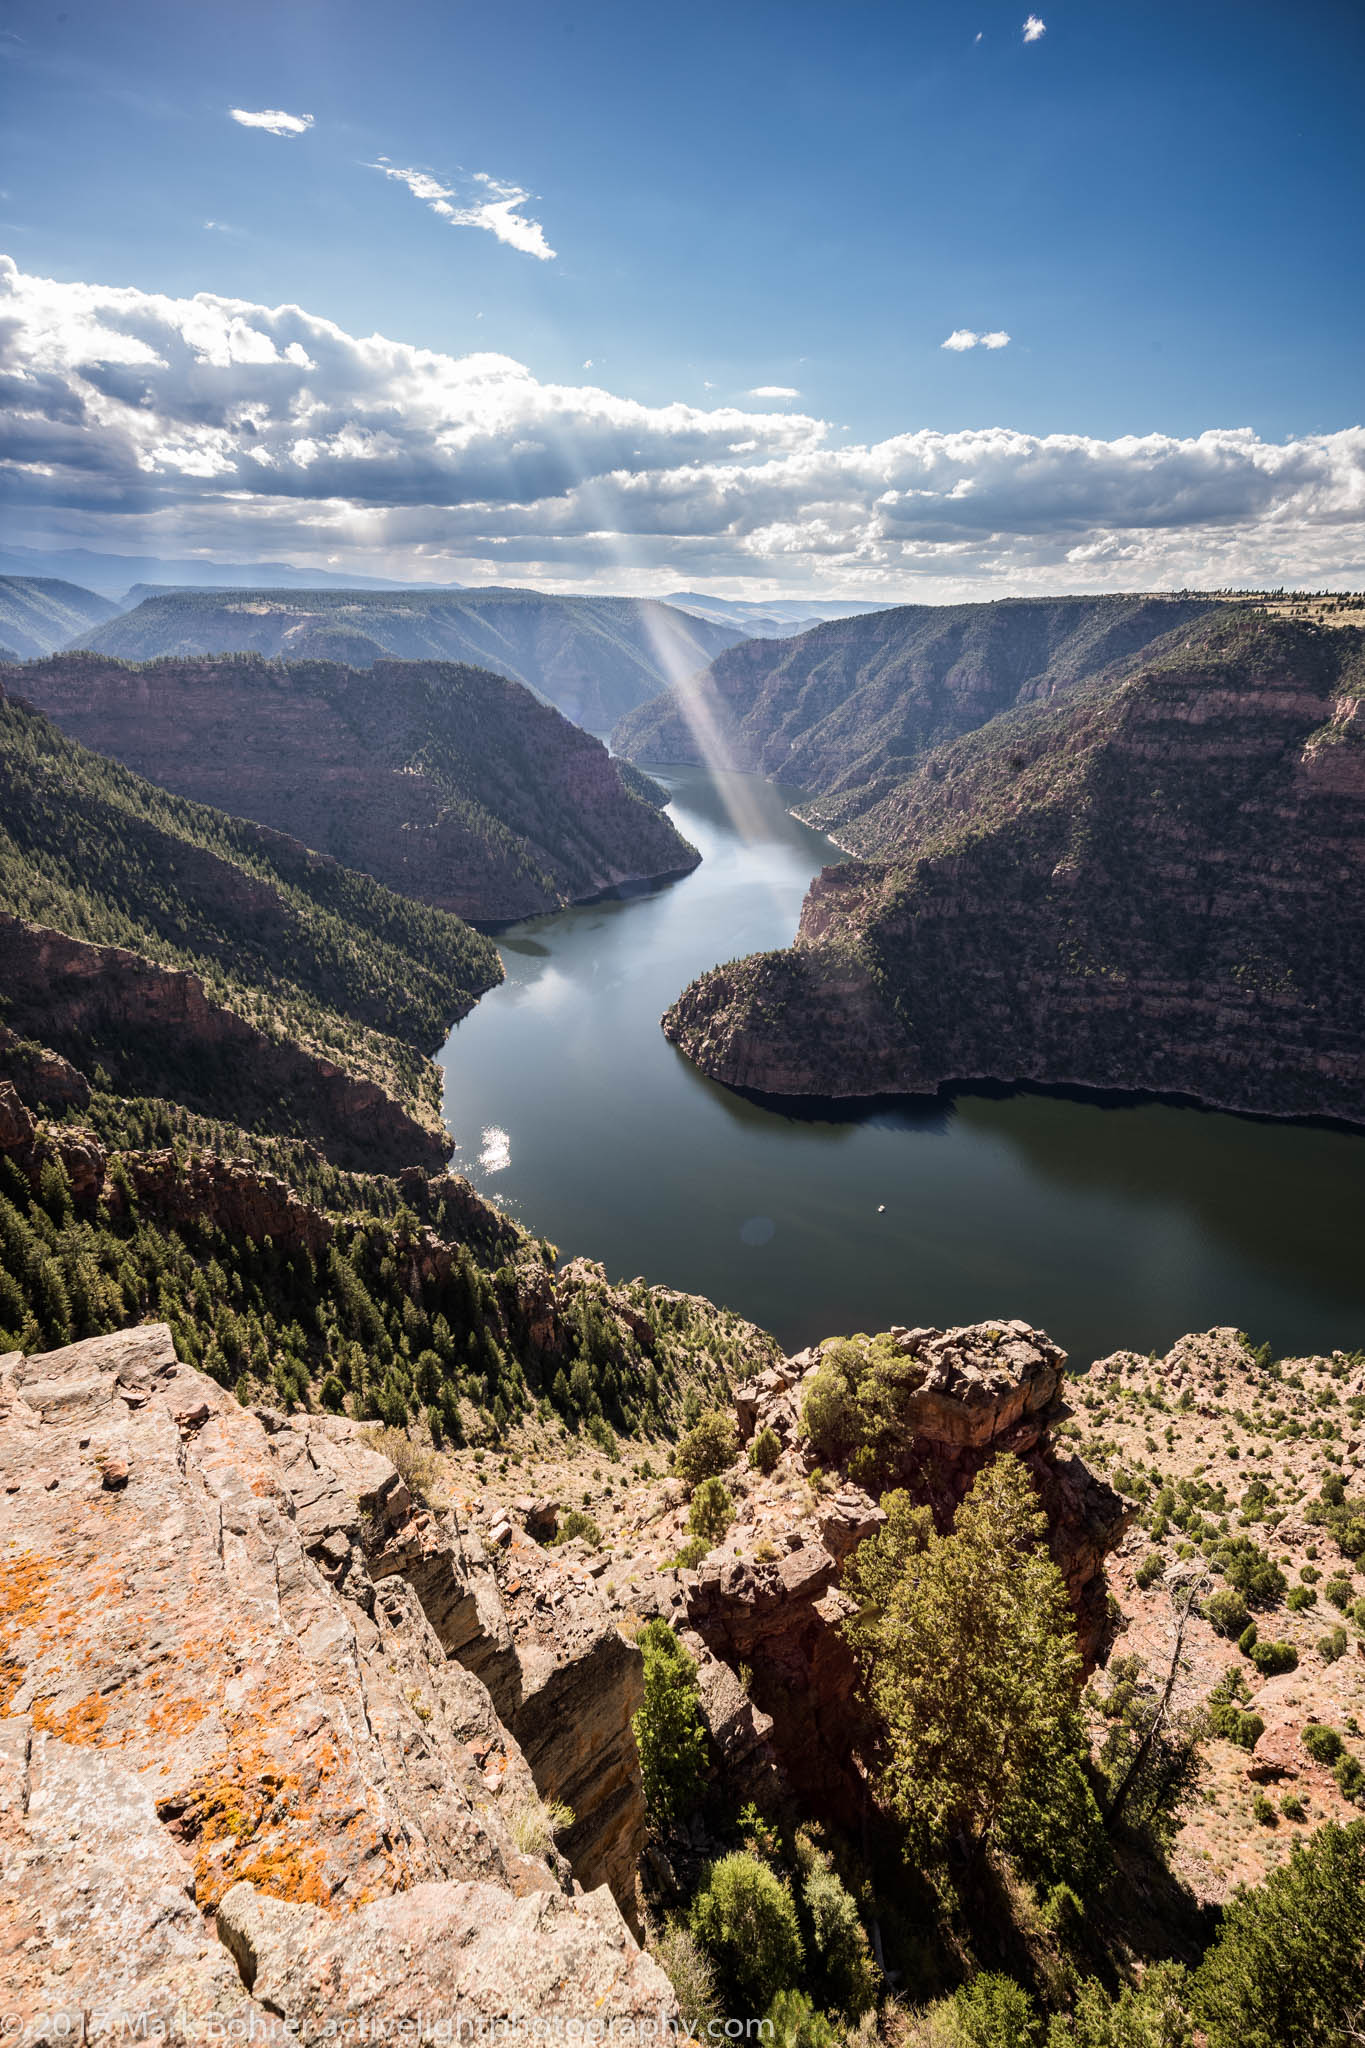 owerboat way down there - the tiny white dot, Flaming Gorge Reservoir